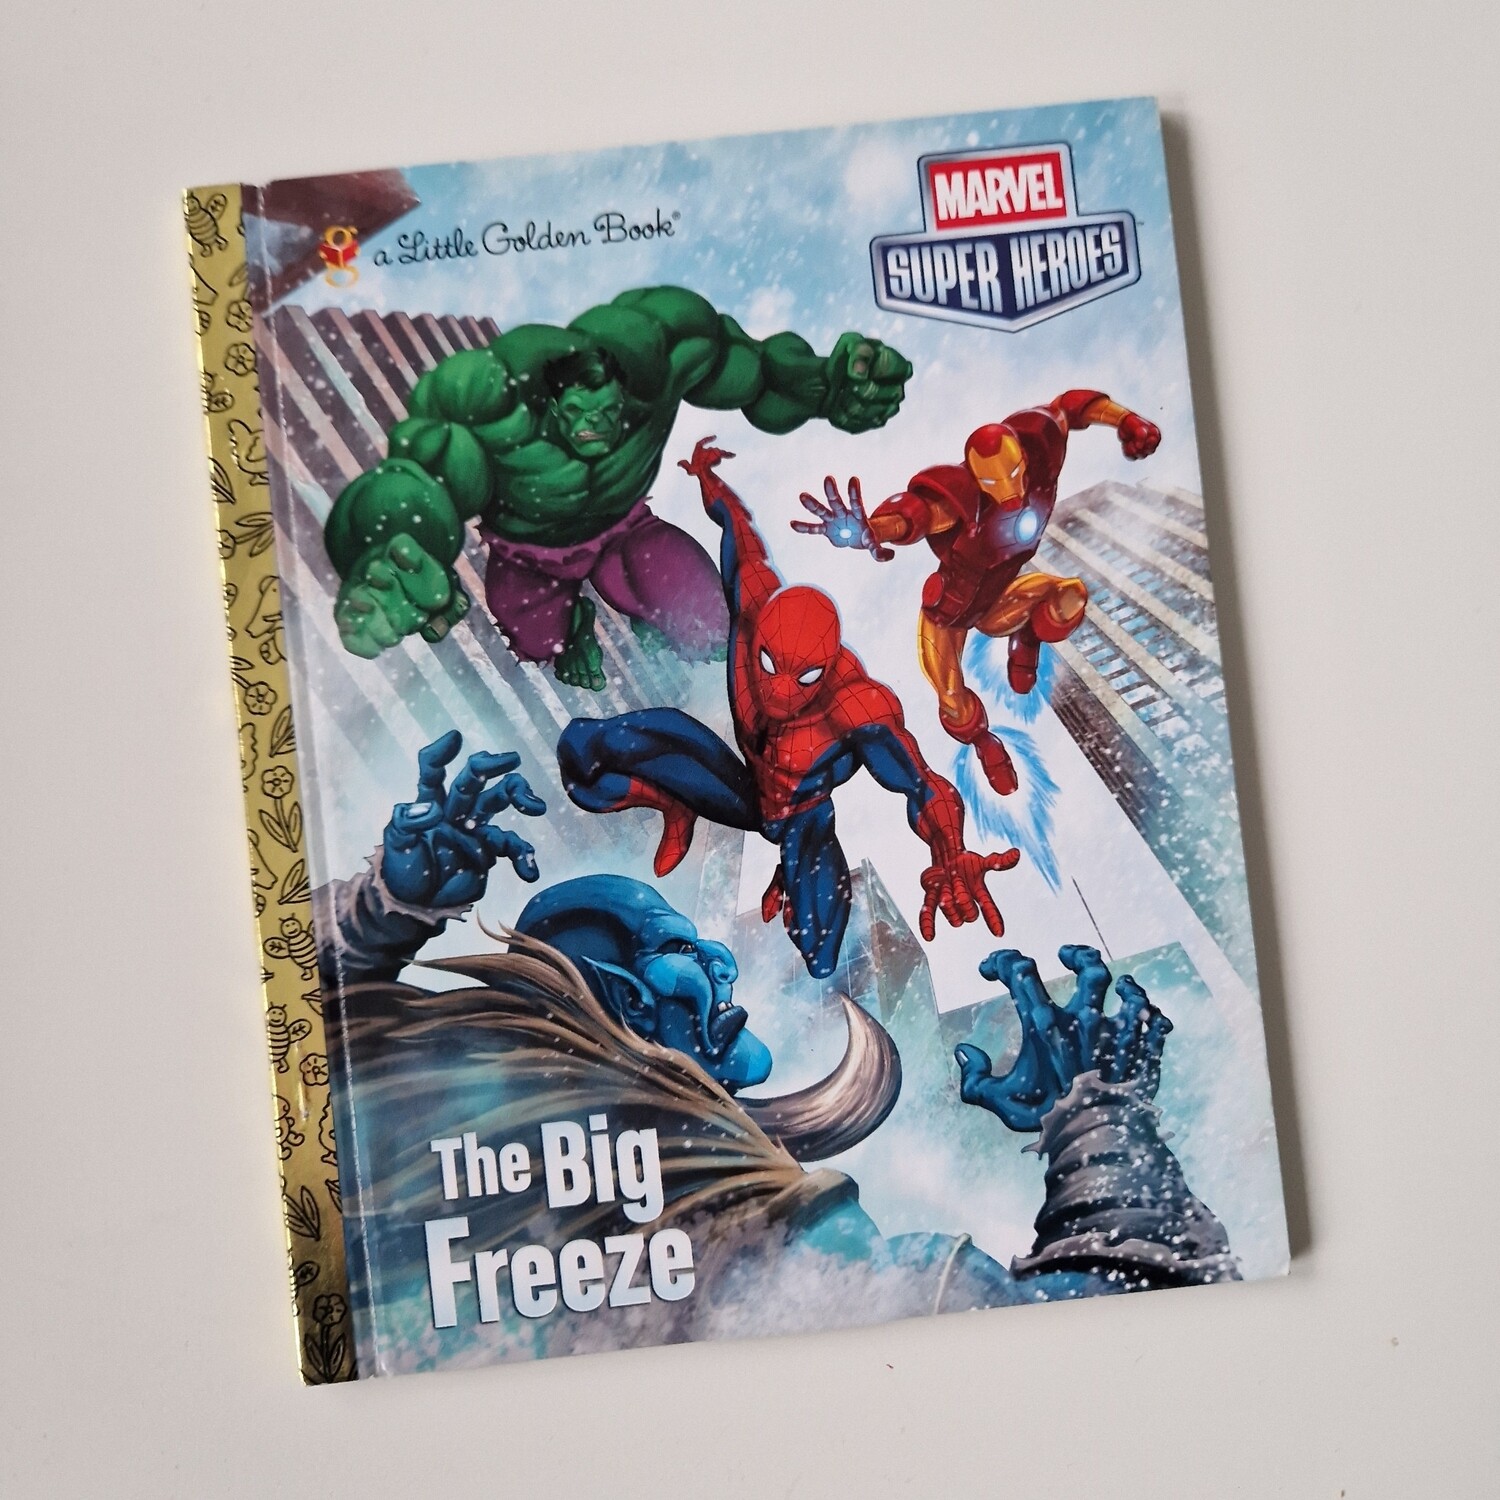 Marvel Super Heroes Notebook - board book will come with metal book corners included